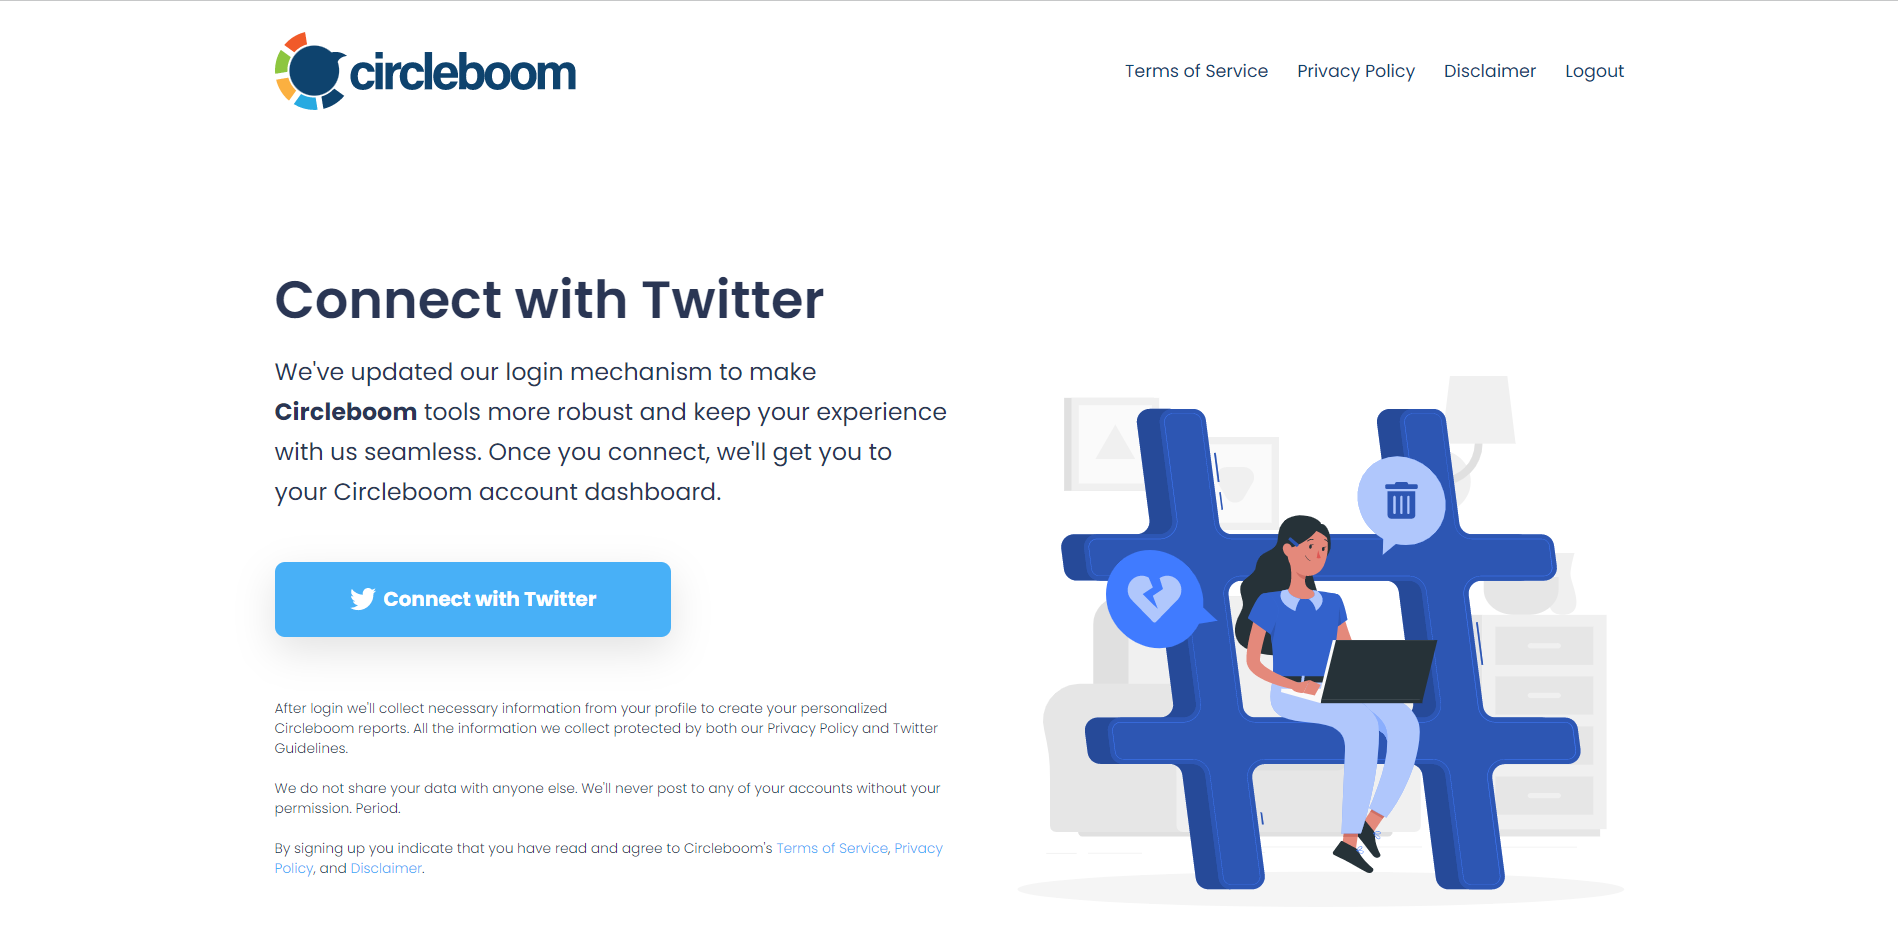 Authorizing Circleboom to connect with your Twitter account